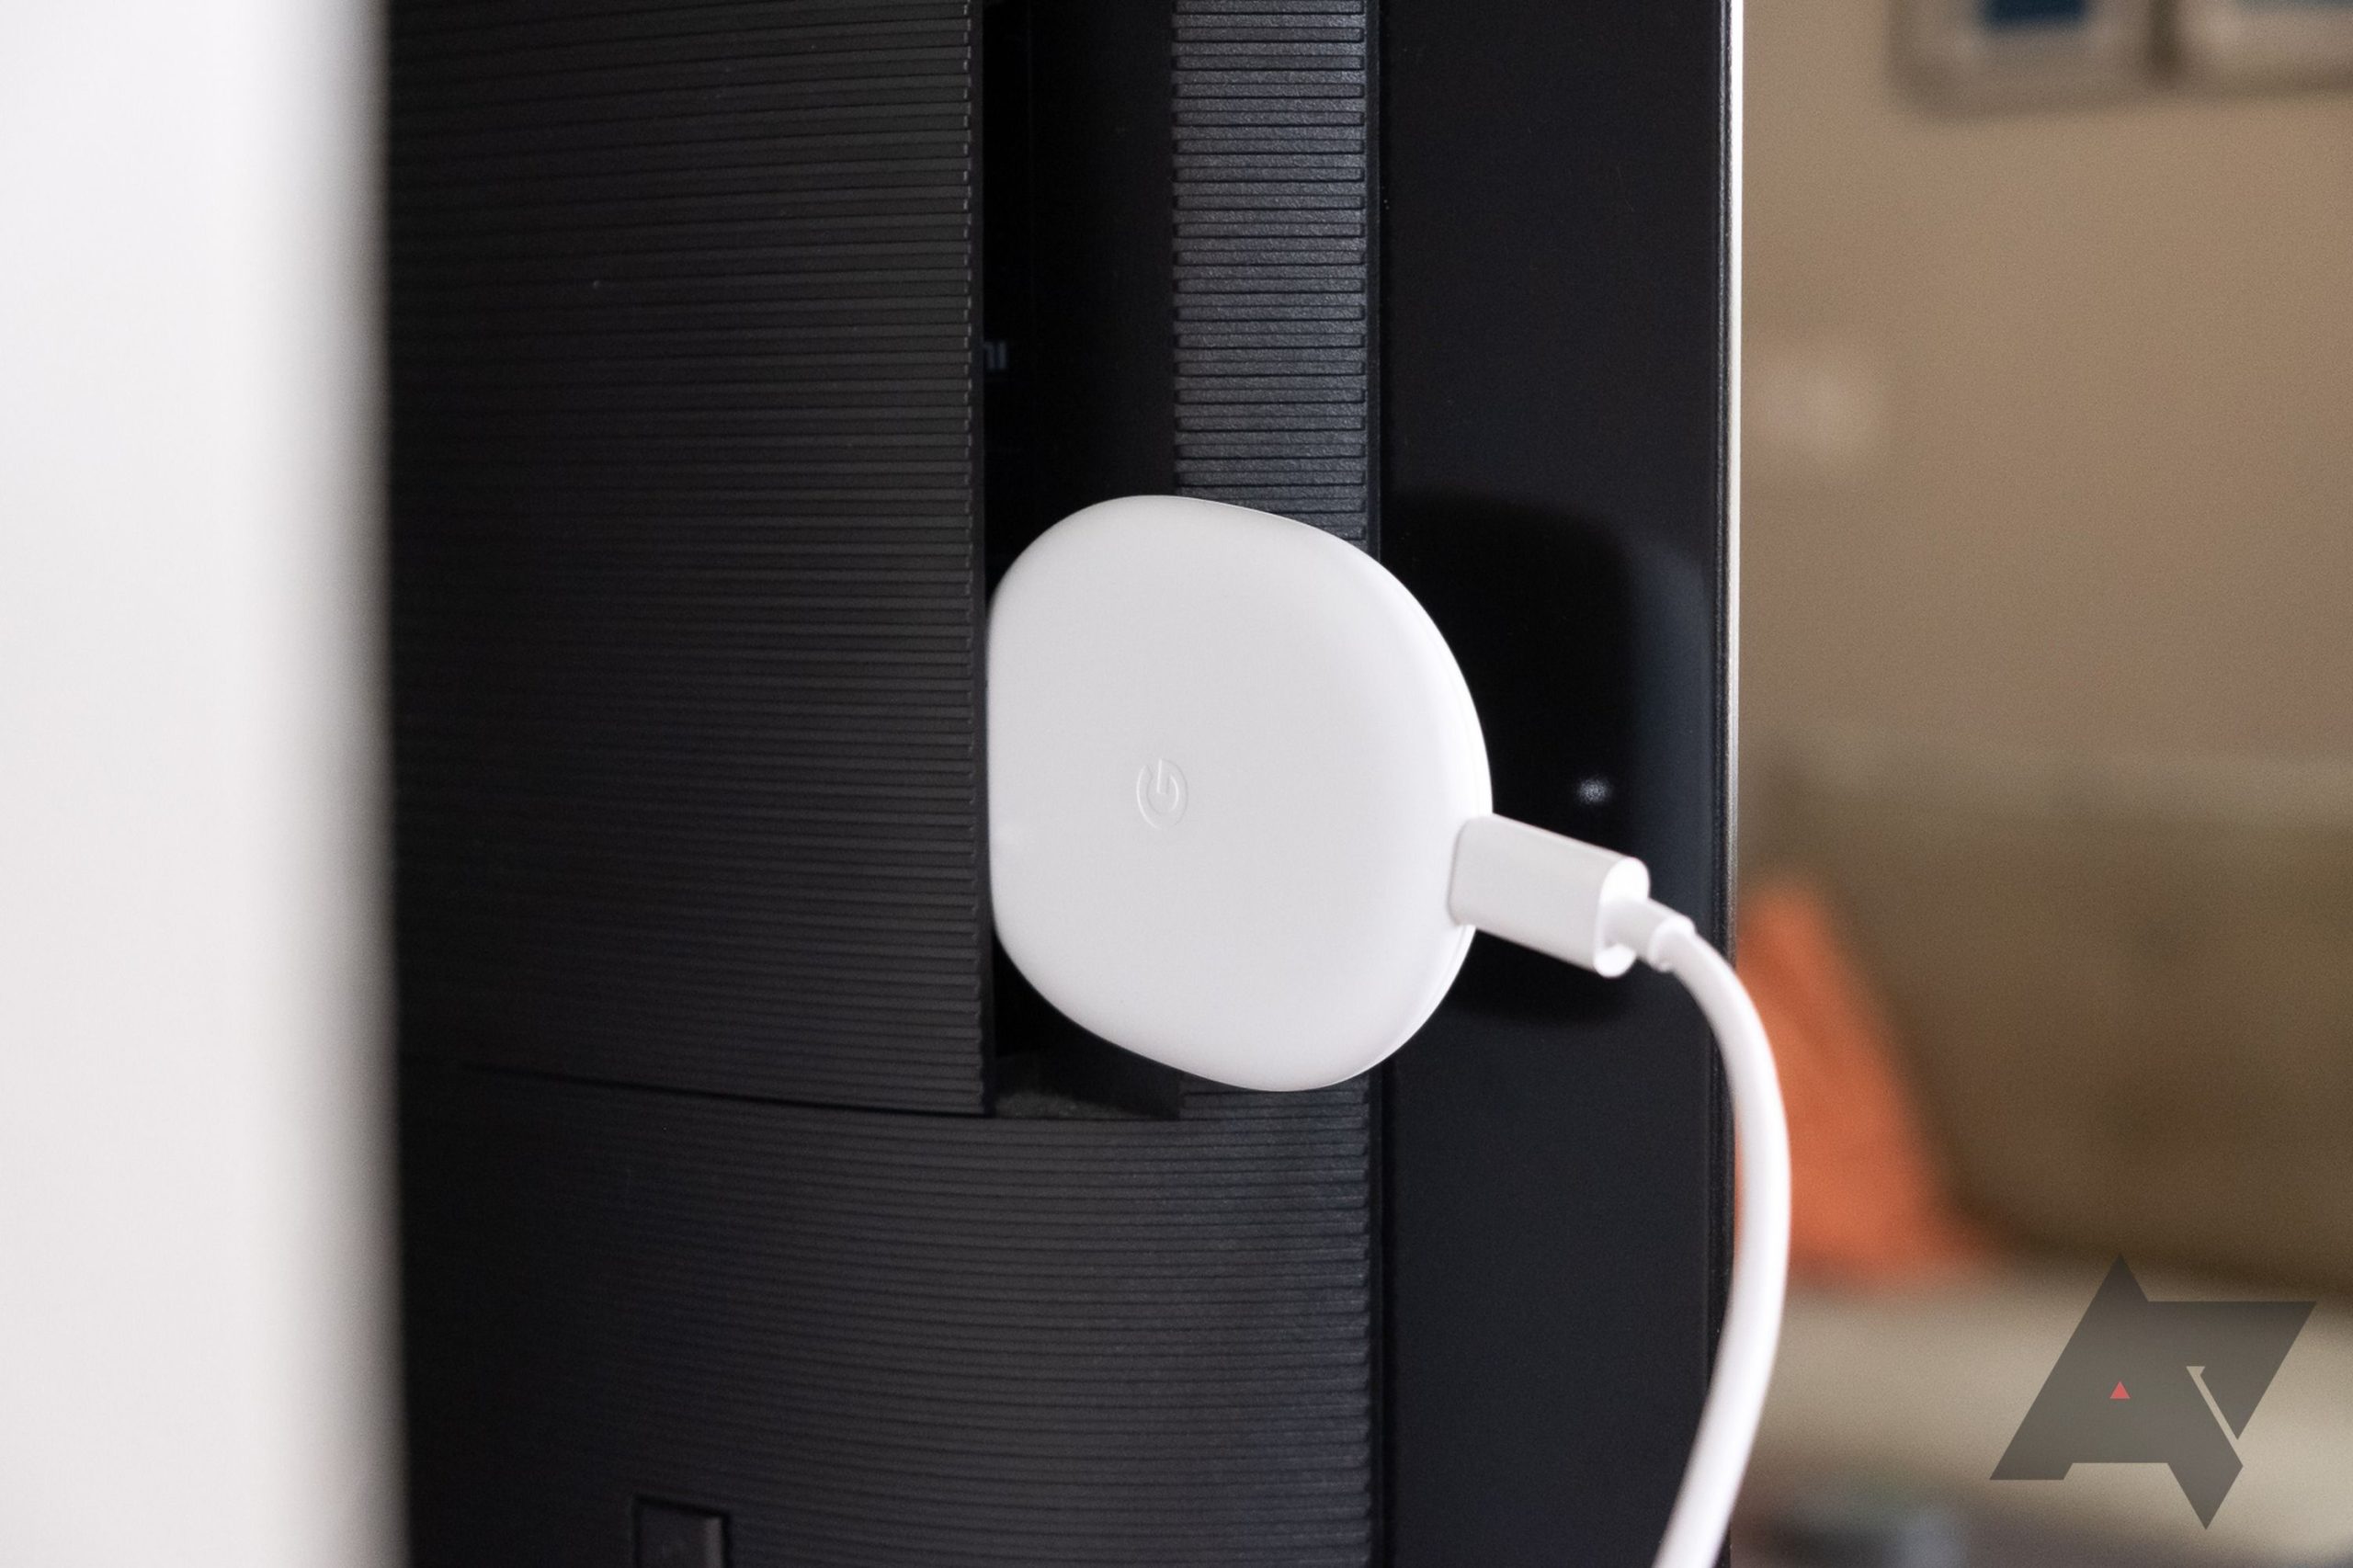 Google Spotted Testing a New Chromecast Model in Google Home